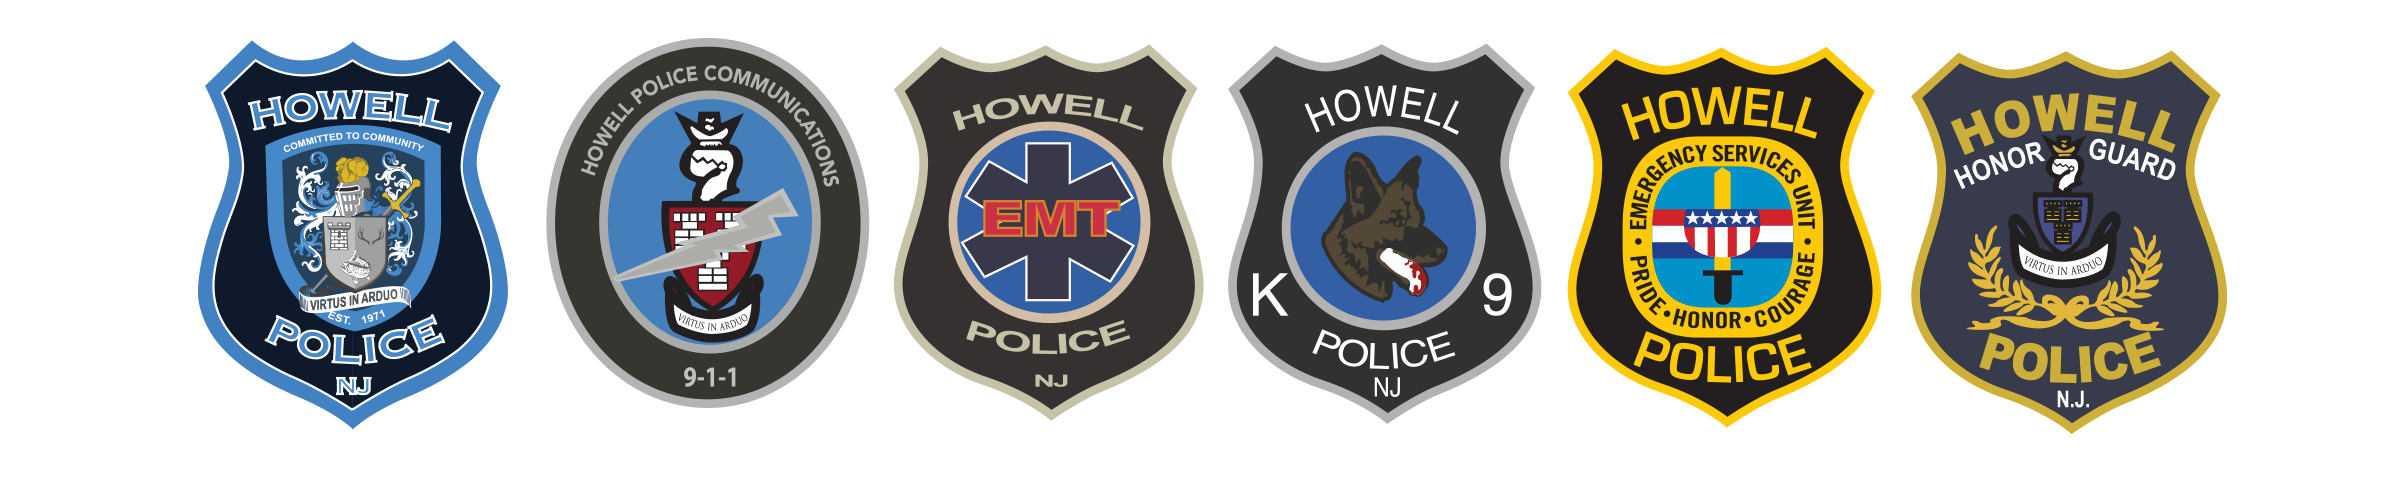 howell township patch